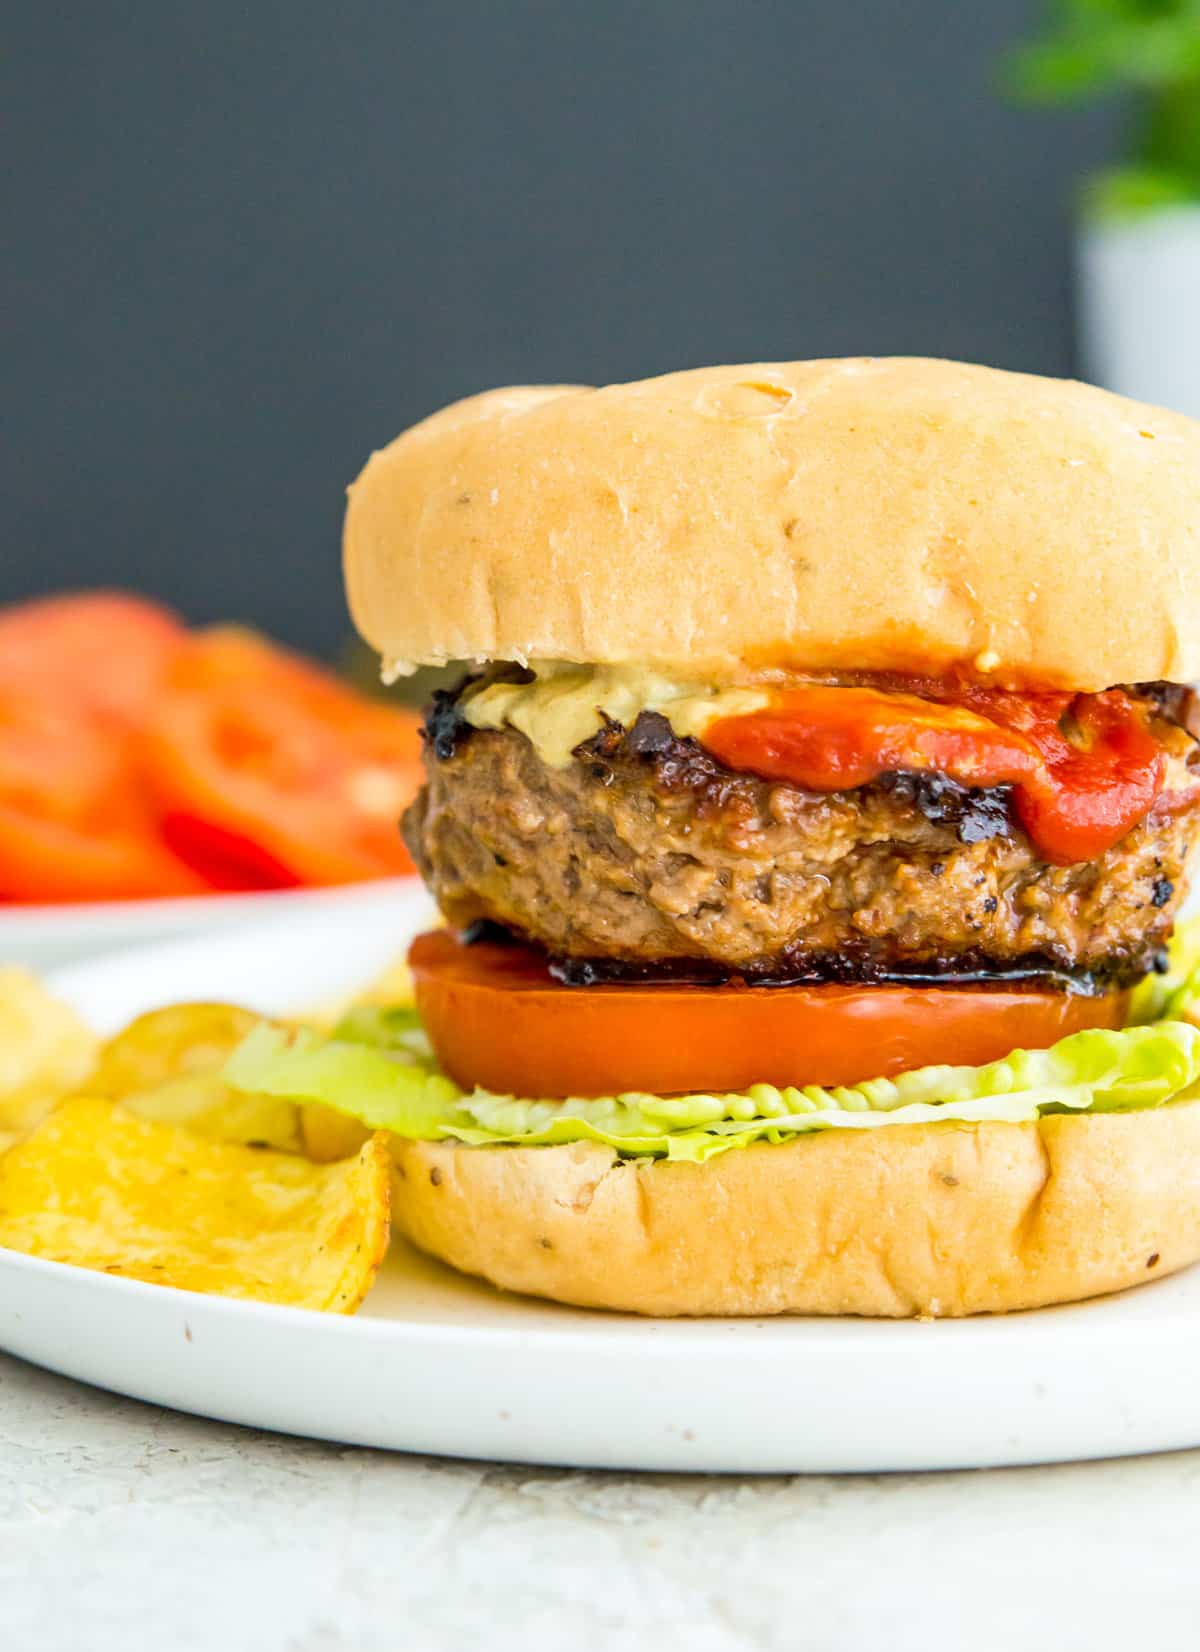 A gluten free burger on a bun topped with lettuce and tomato